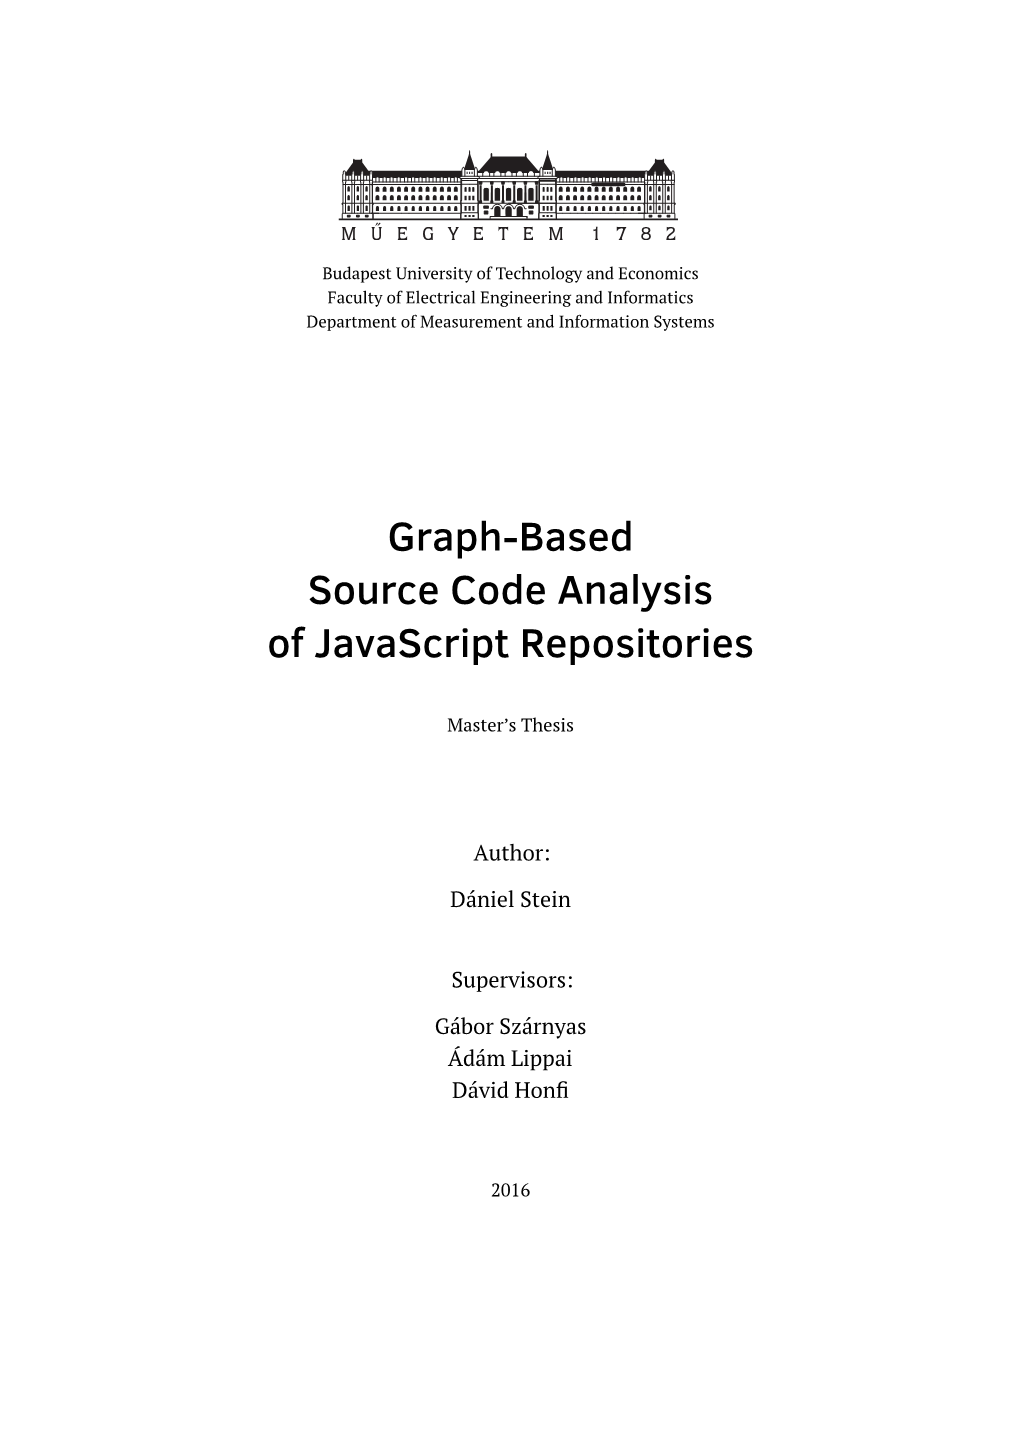 Graph-Based Source Code Analysis of Javascript Repositories